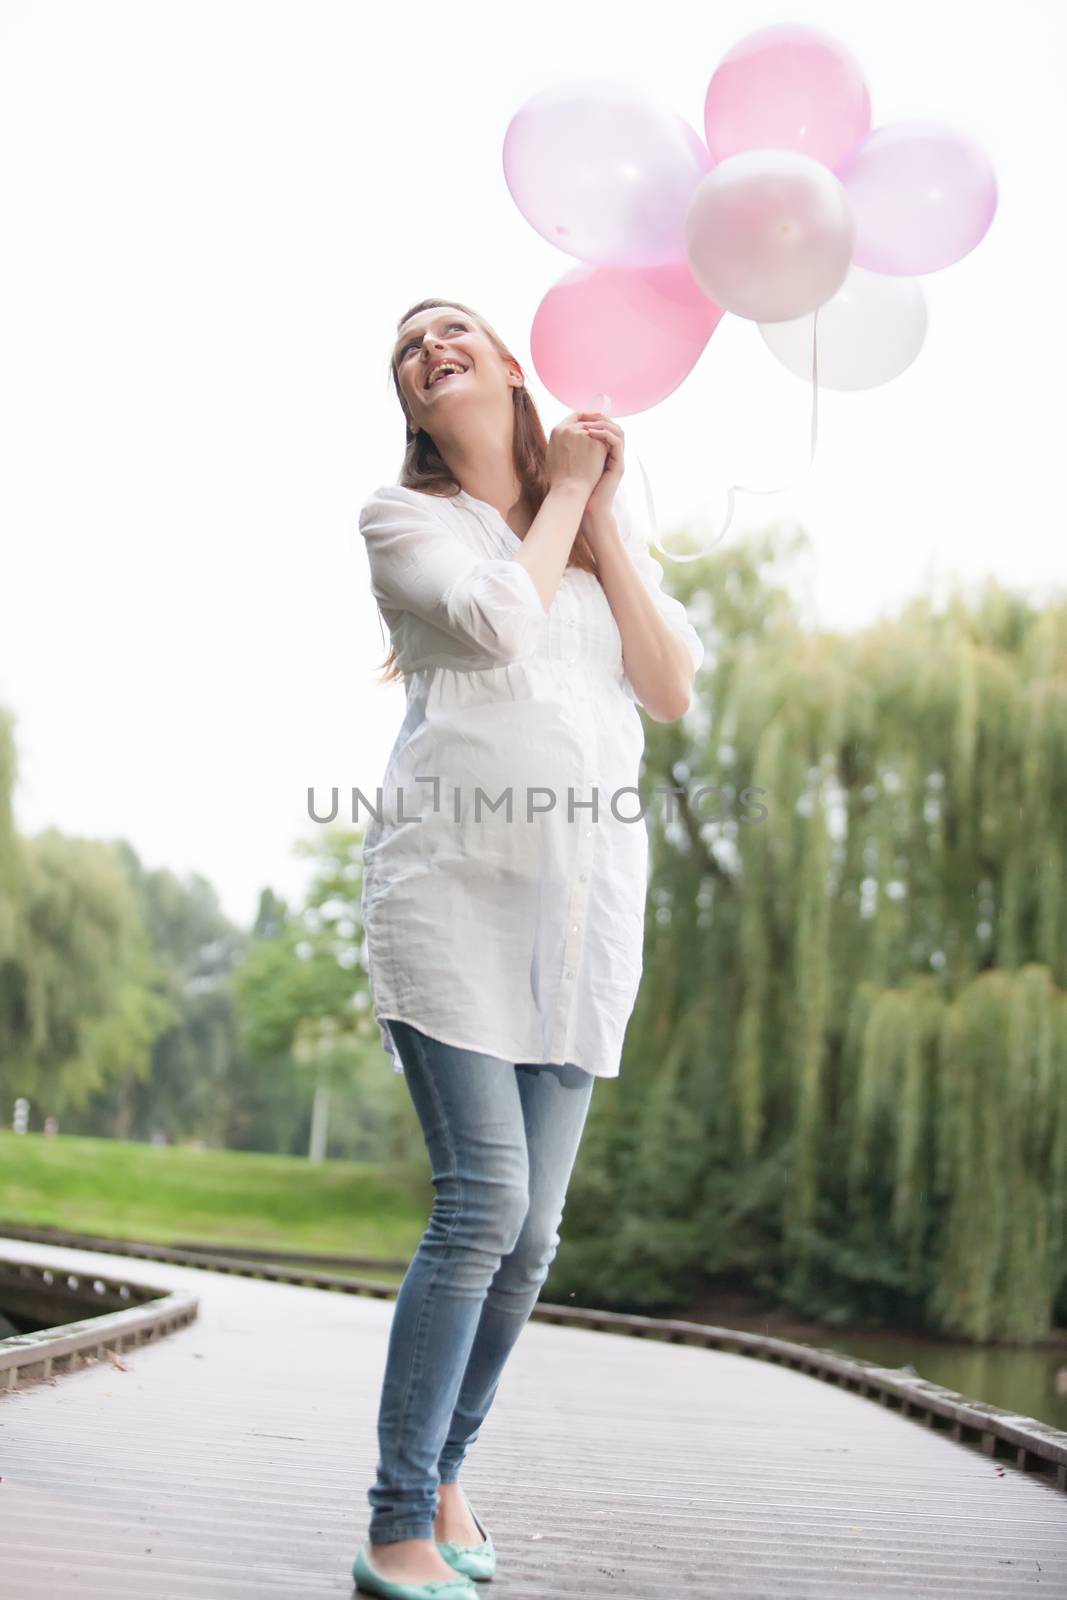 Pregnant woman with balloons by DNFStyle